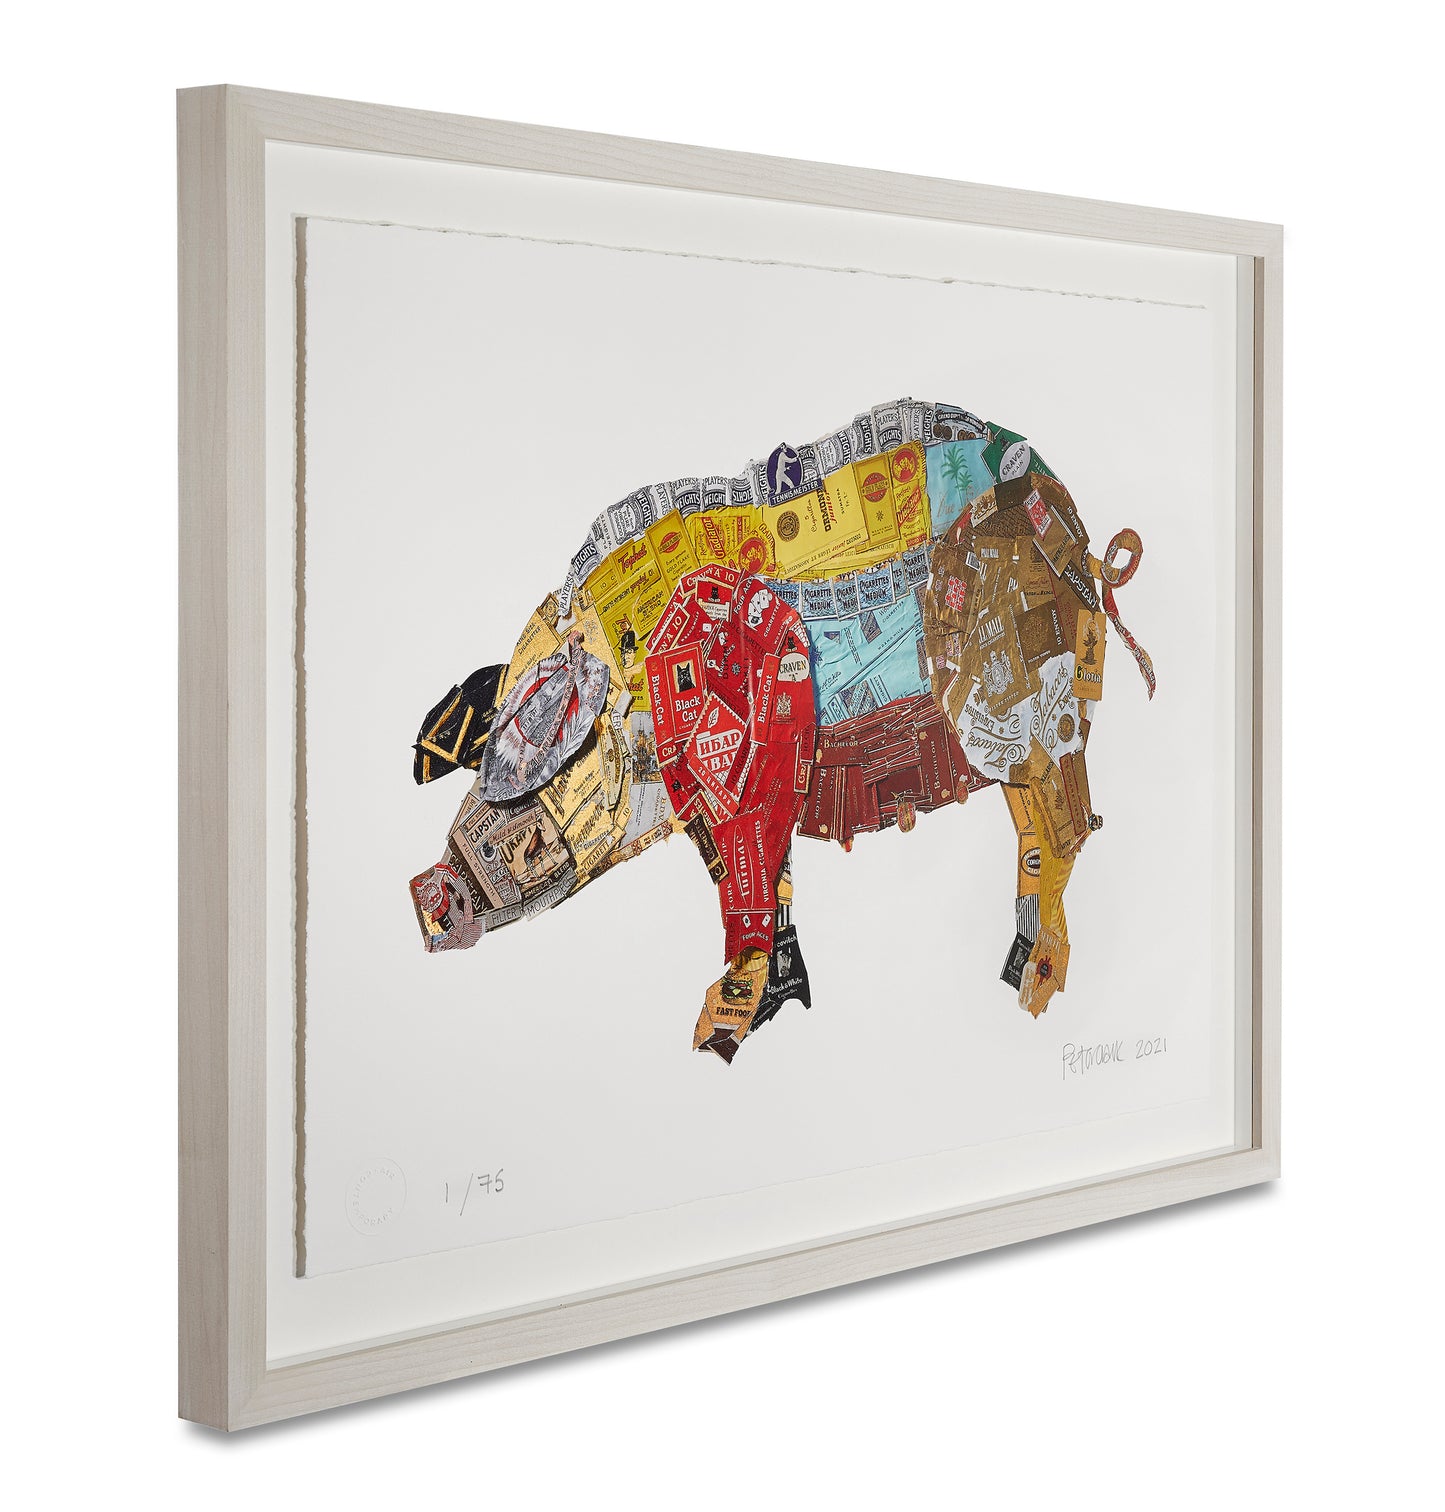 Peter Clarke- Smoked Bacon, Limited edition, Print, Collage, Pig -TAP Galleries, Essex Galleries